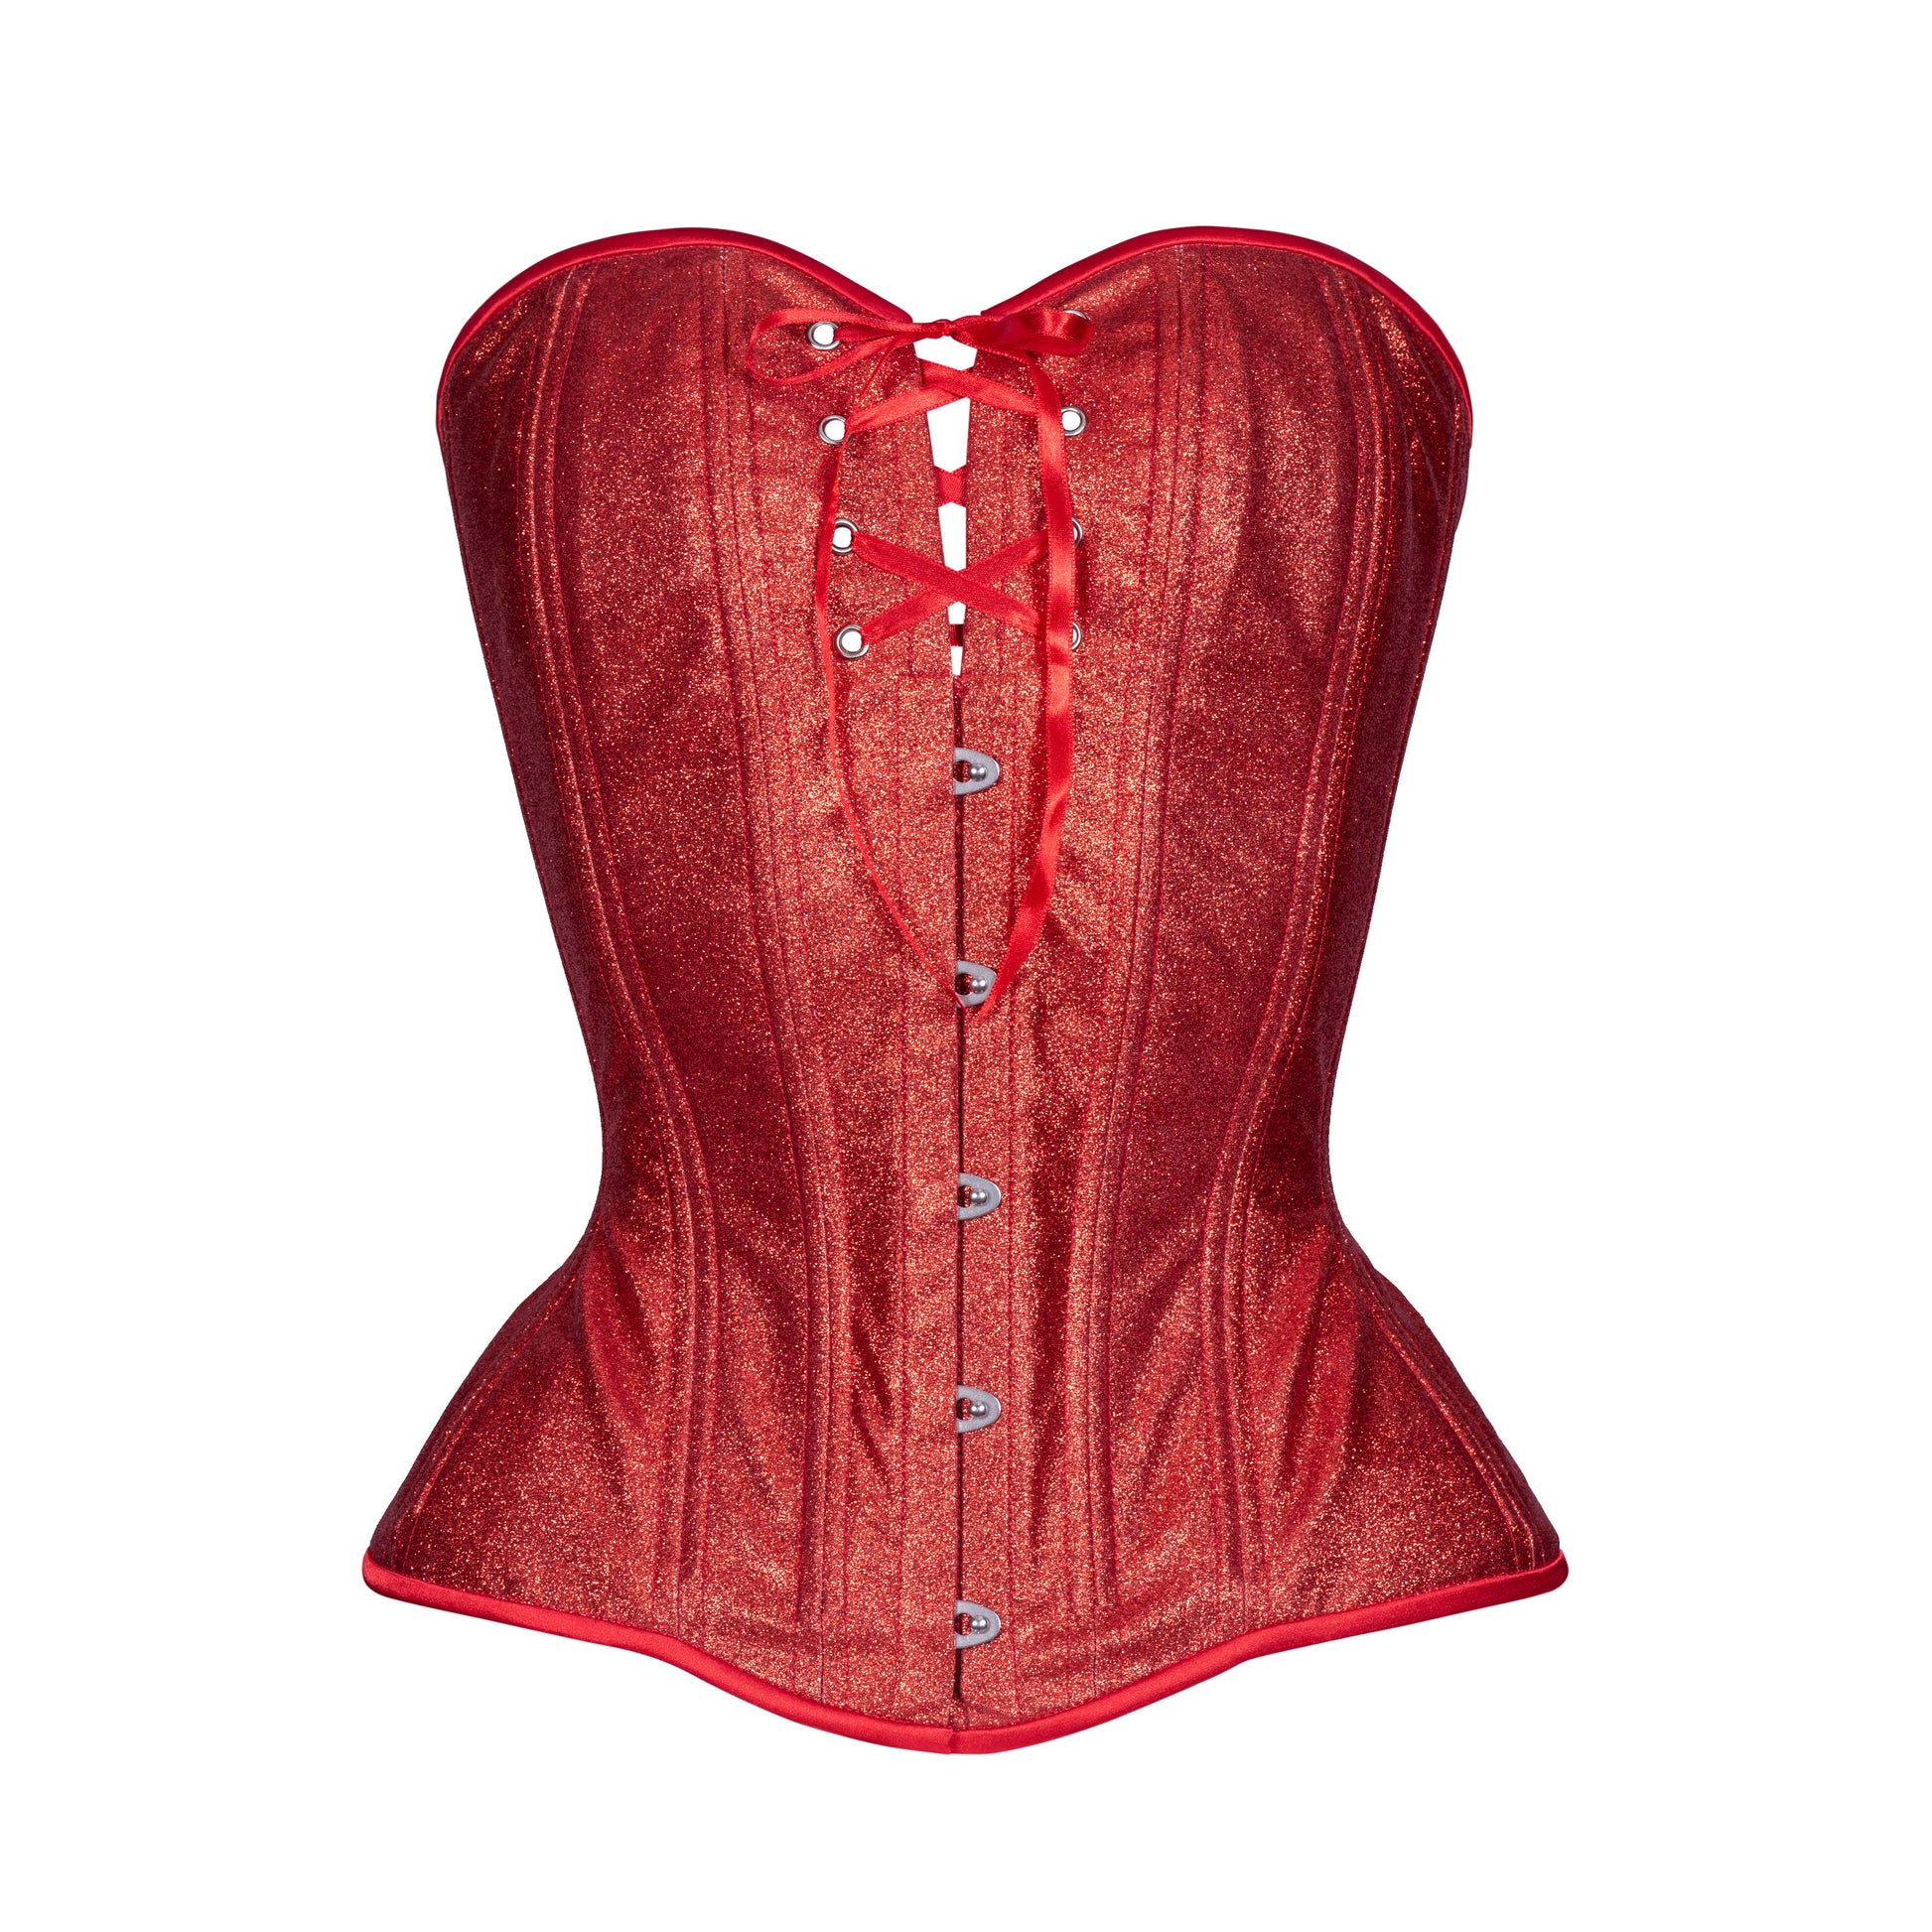 shoppers rush to buy $22 corset that's flattering on